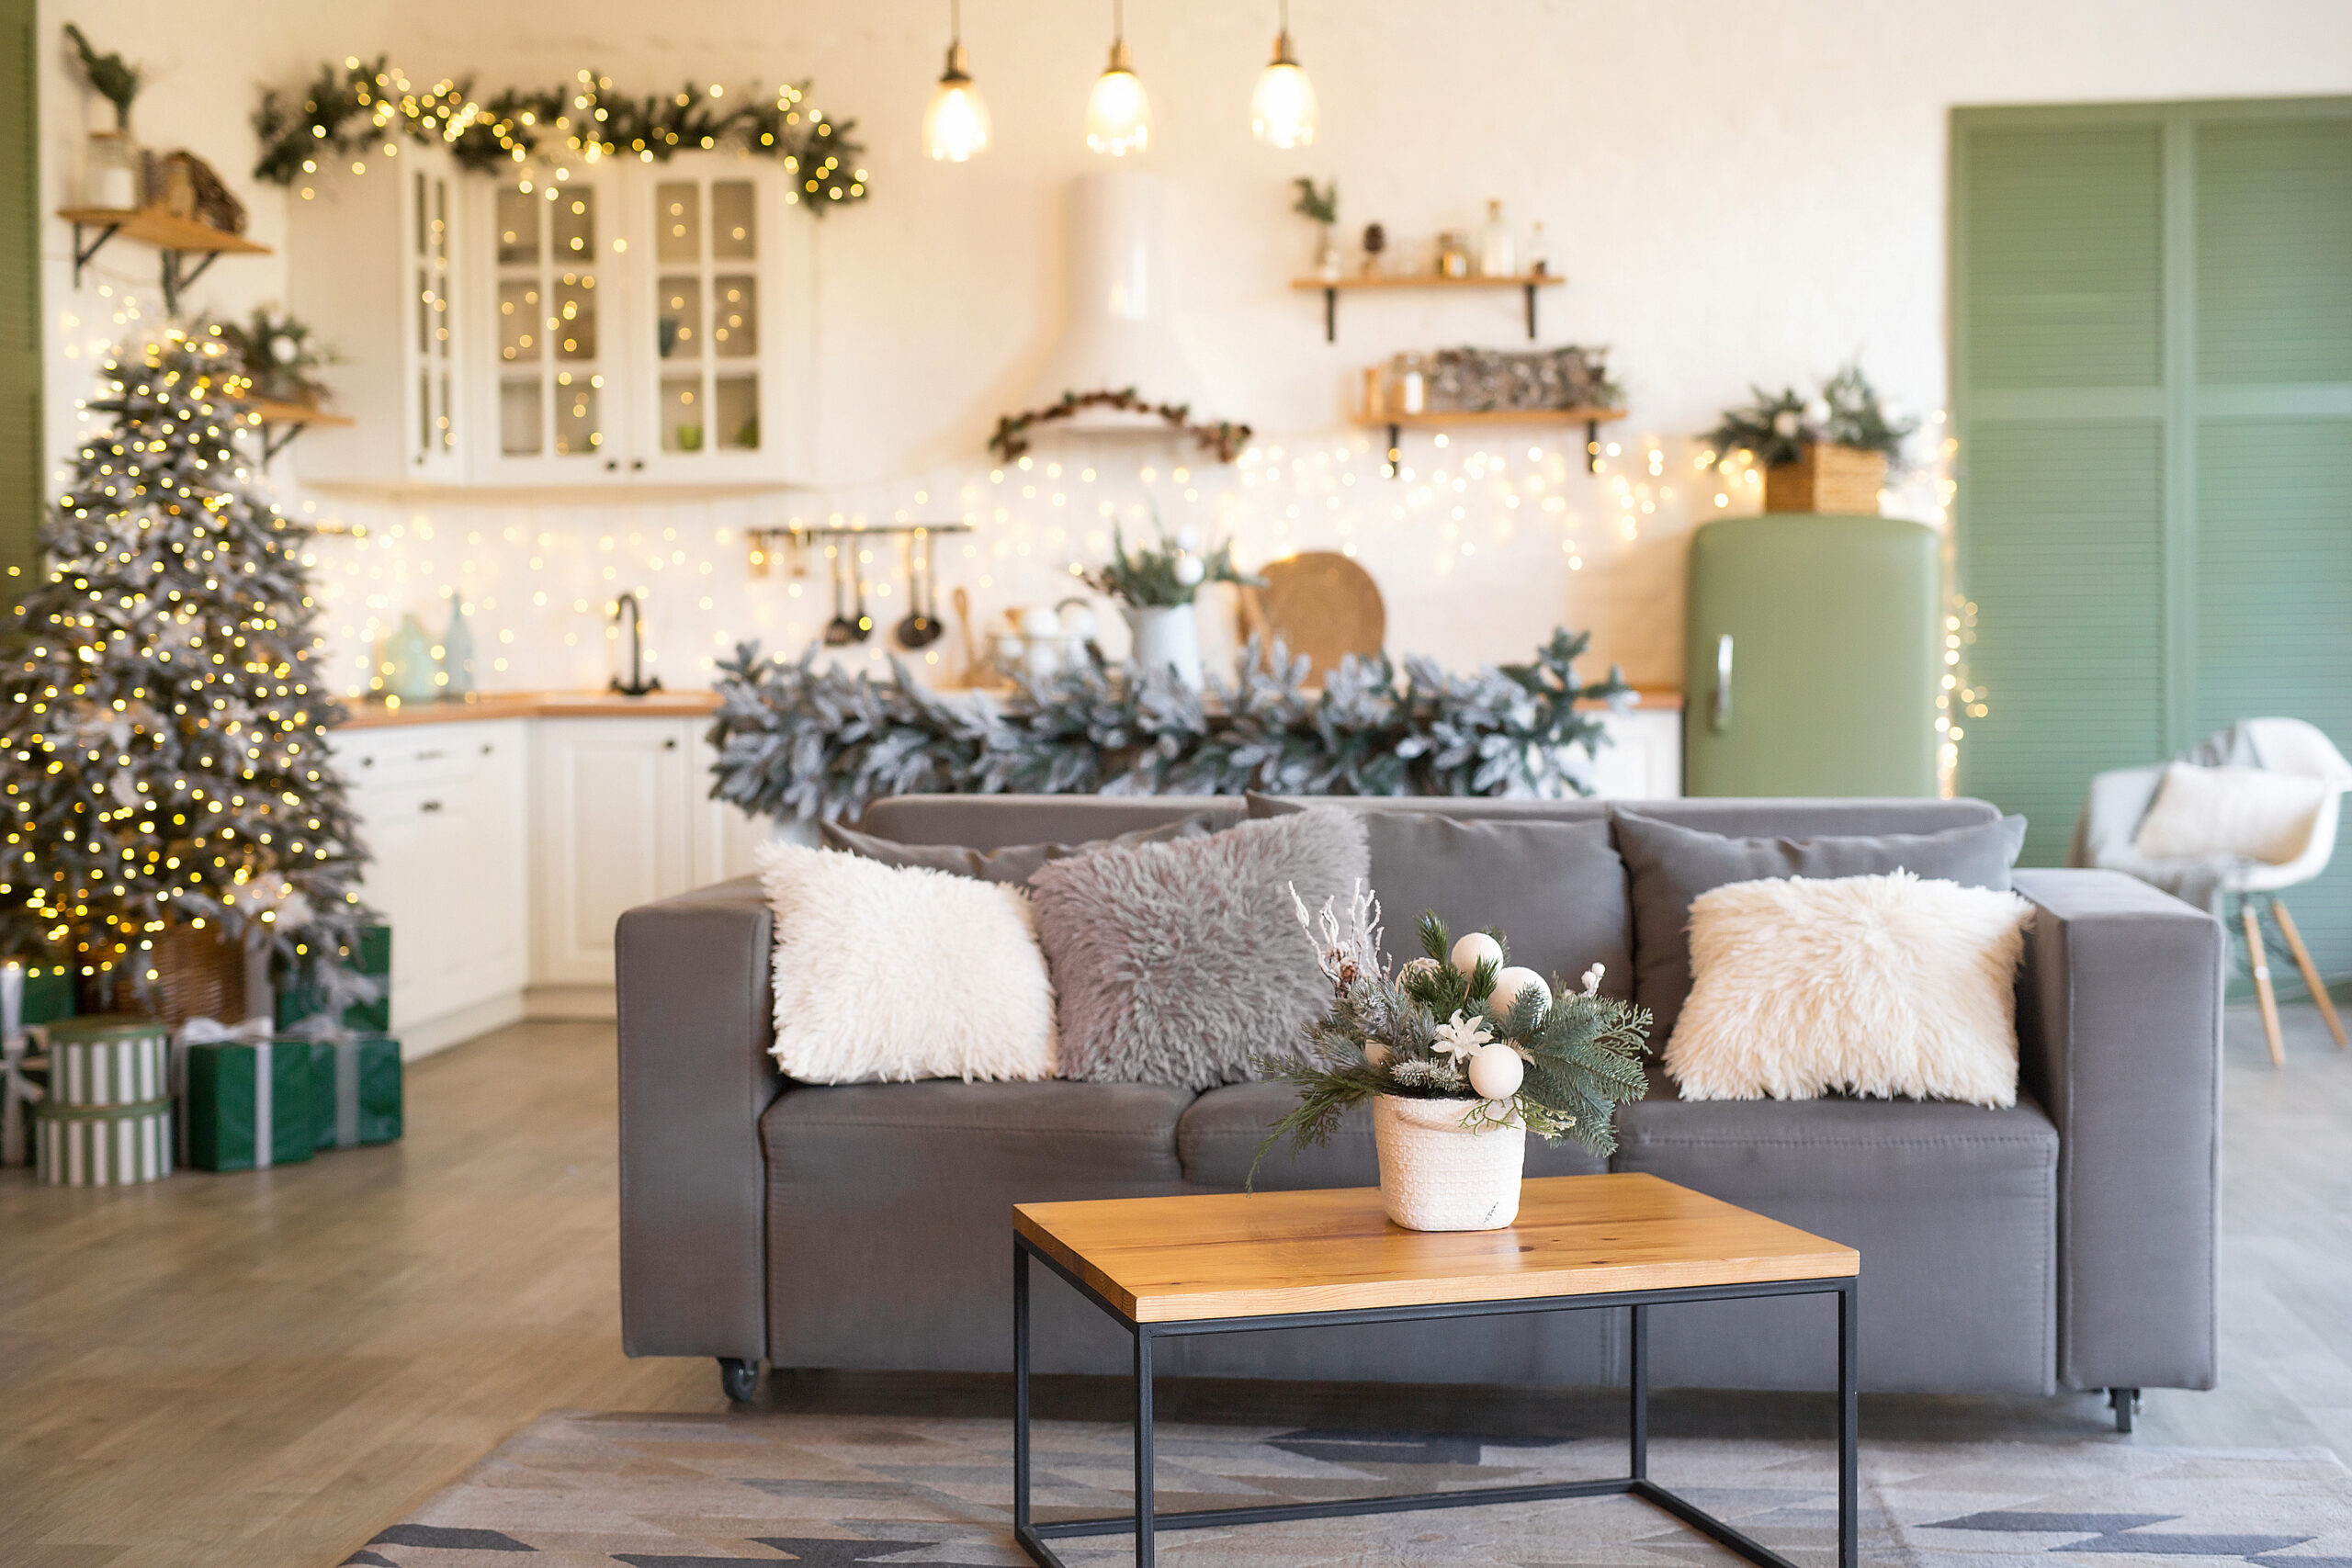 Rental Apartment Christmas Decorating: 11 Magical Ideas for Renters